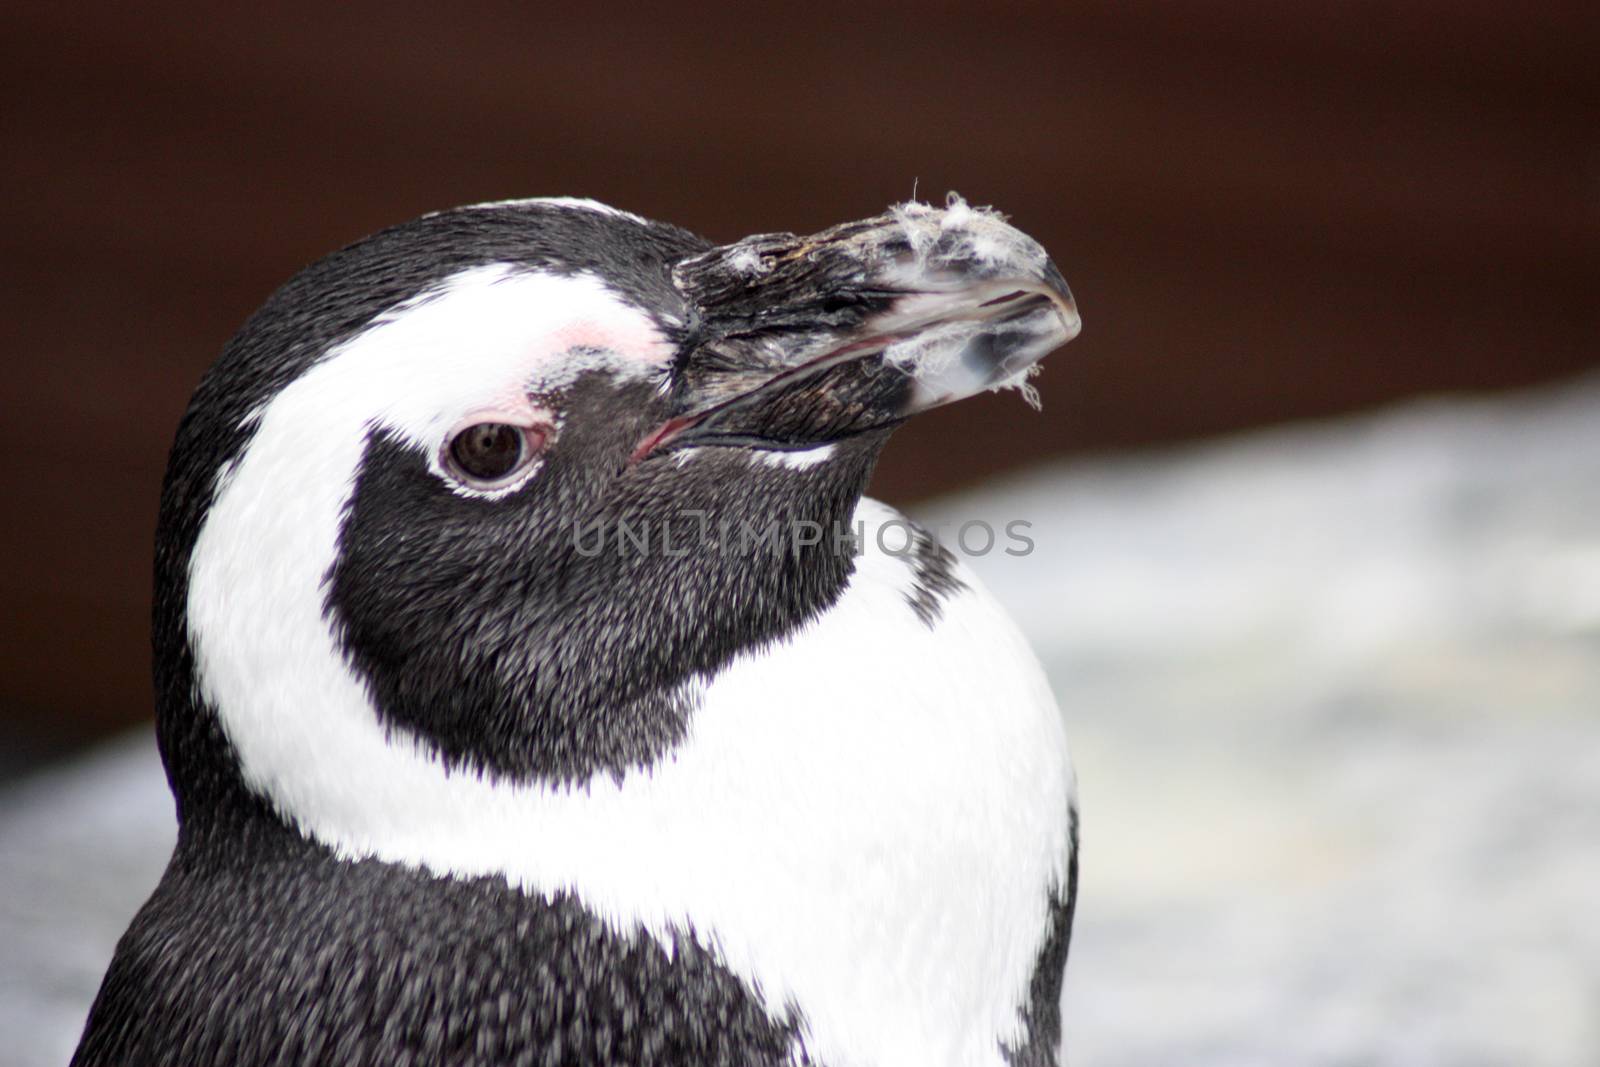 African penguin portrait. African penguin - spheniscus demersus, also known as the jackass penguin and black-footed penguin